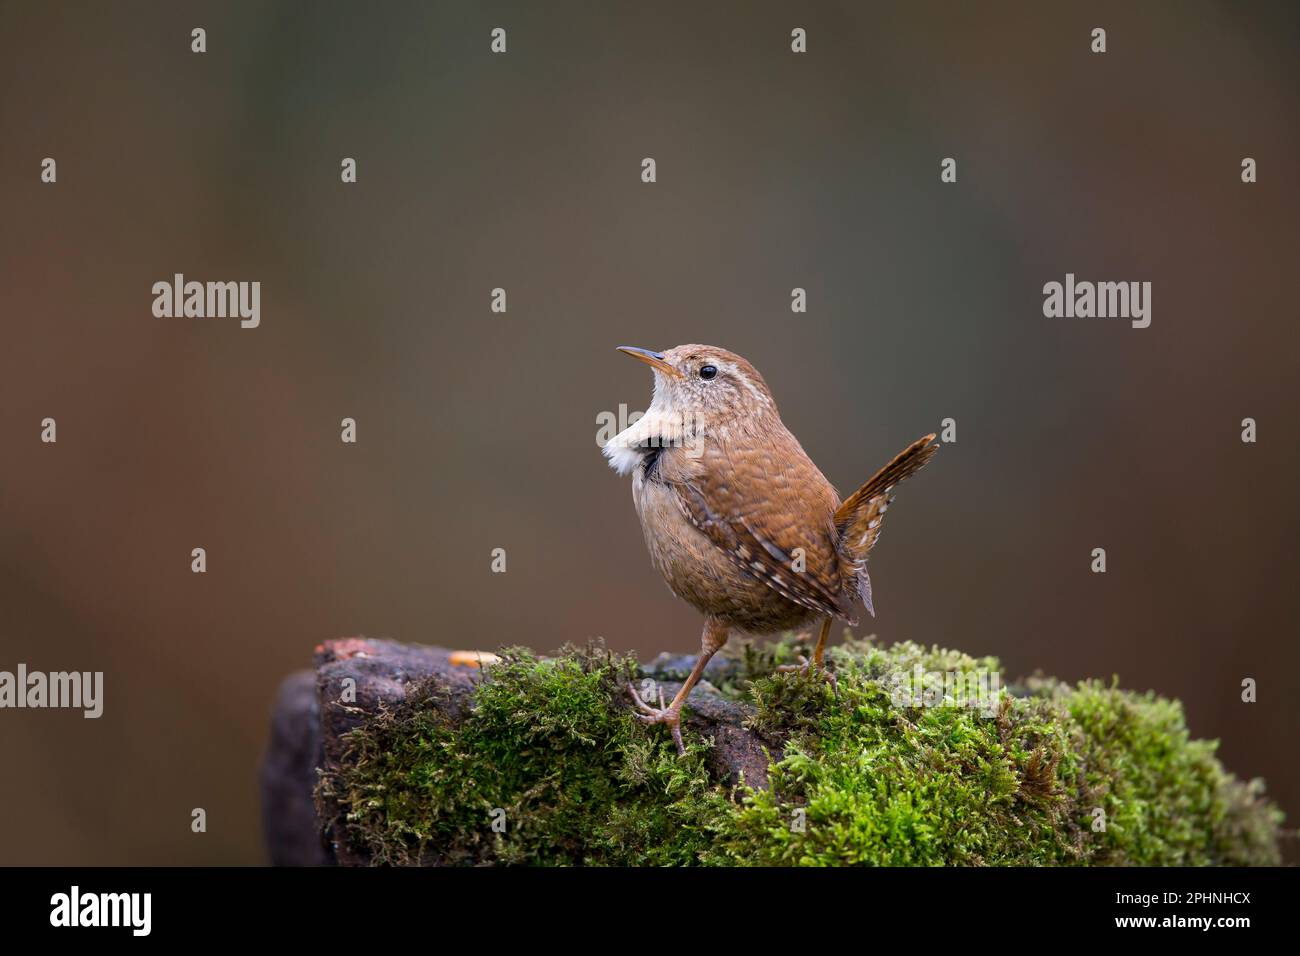 Detailed close up of a wild, UK wren bird (Troglodytes troglodytes) standing isolated on a moss-covered log in natural woodland habitat. Stock Photo